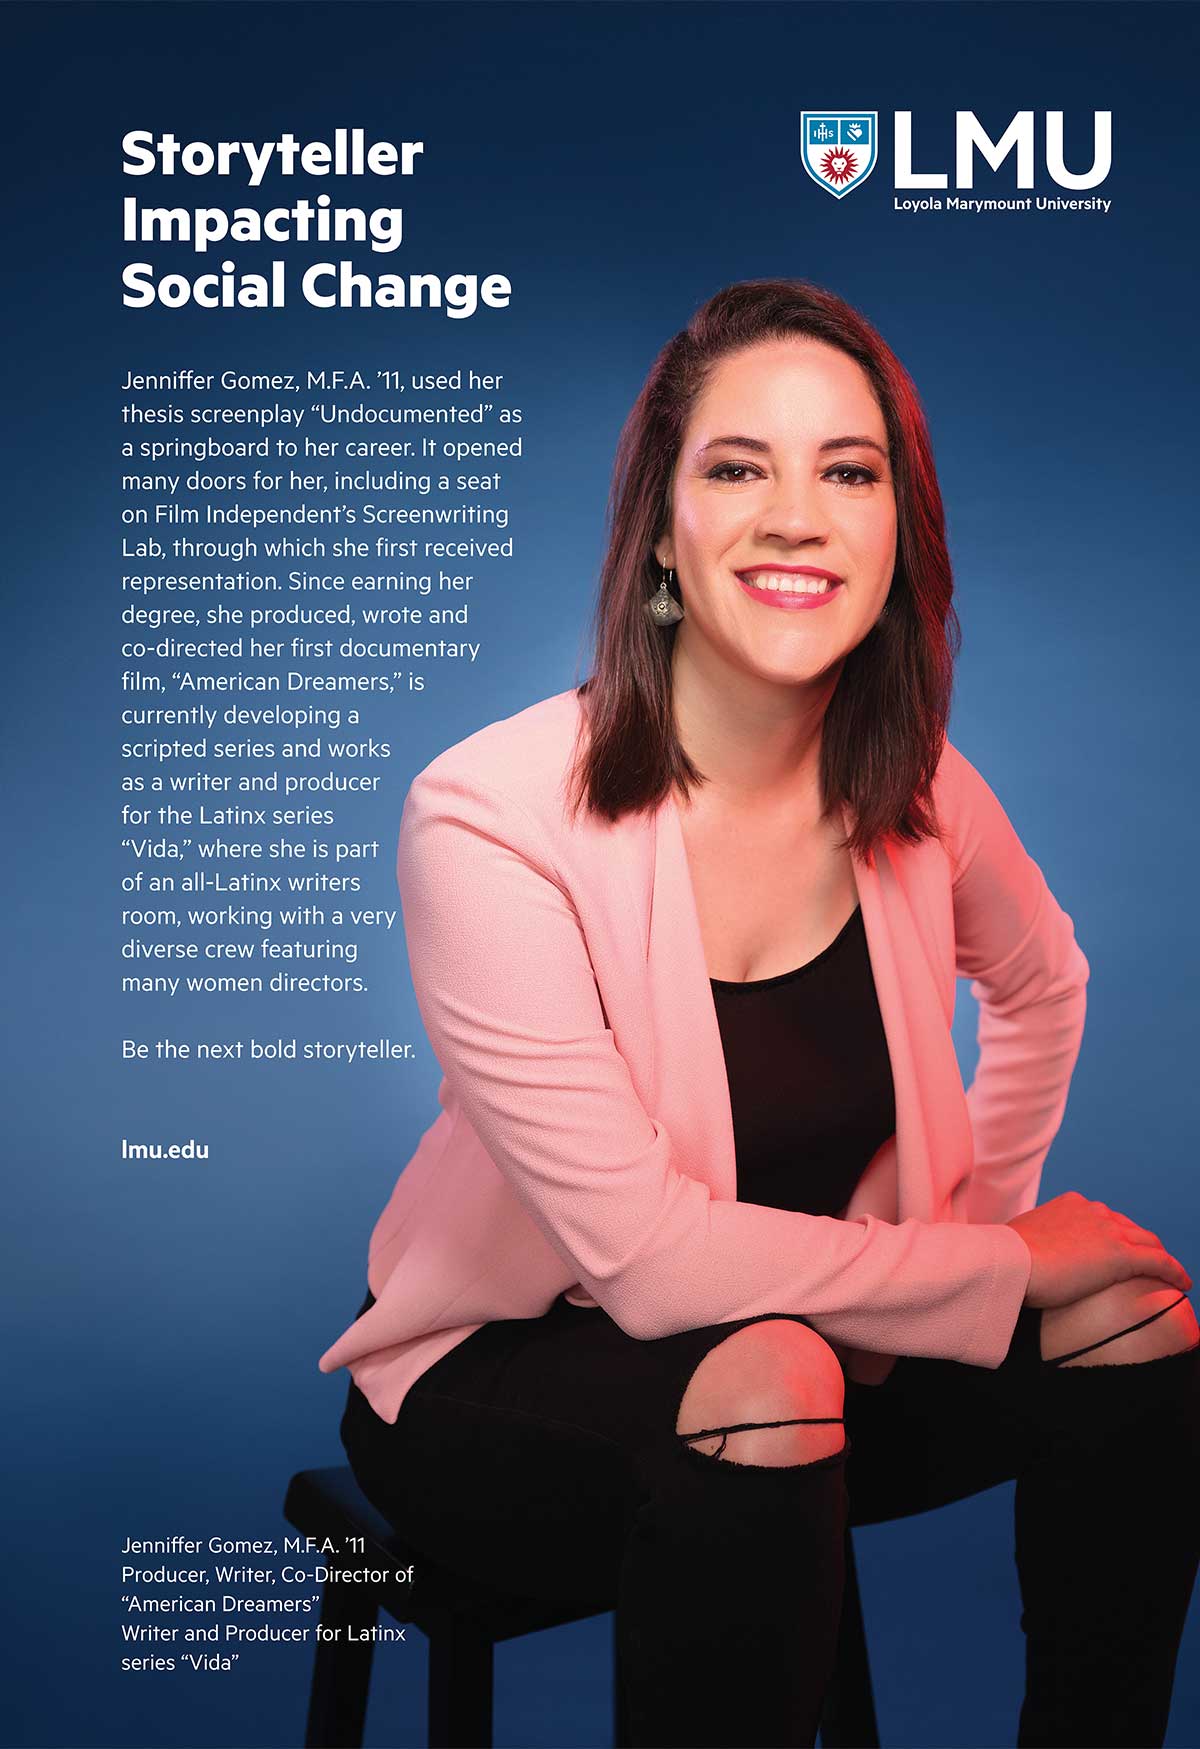 Advertisement featuring Jennifer Gomez with the words Storyteller Impacting Social Change